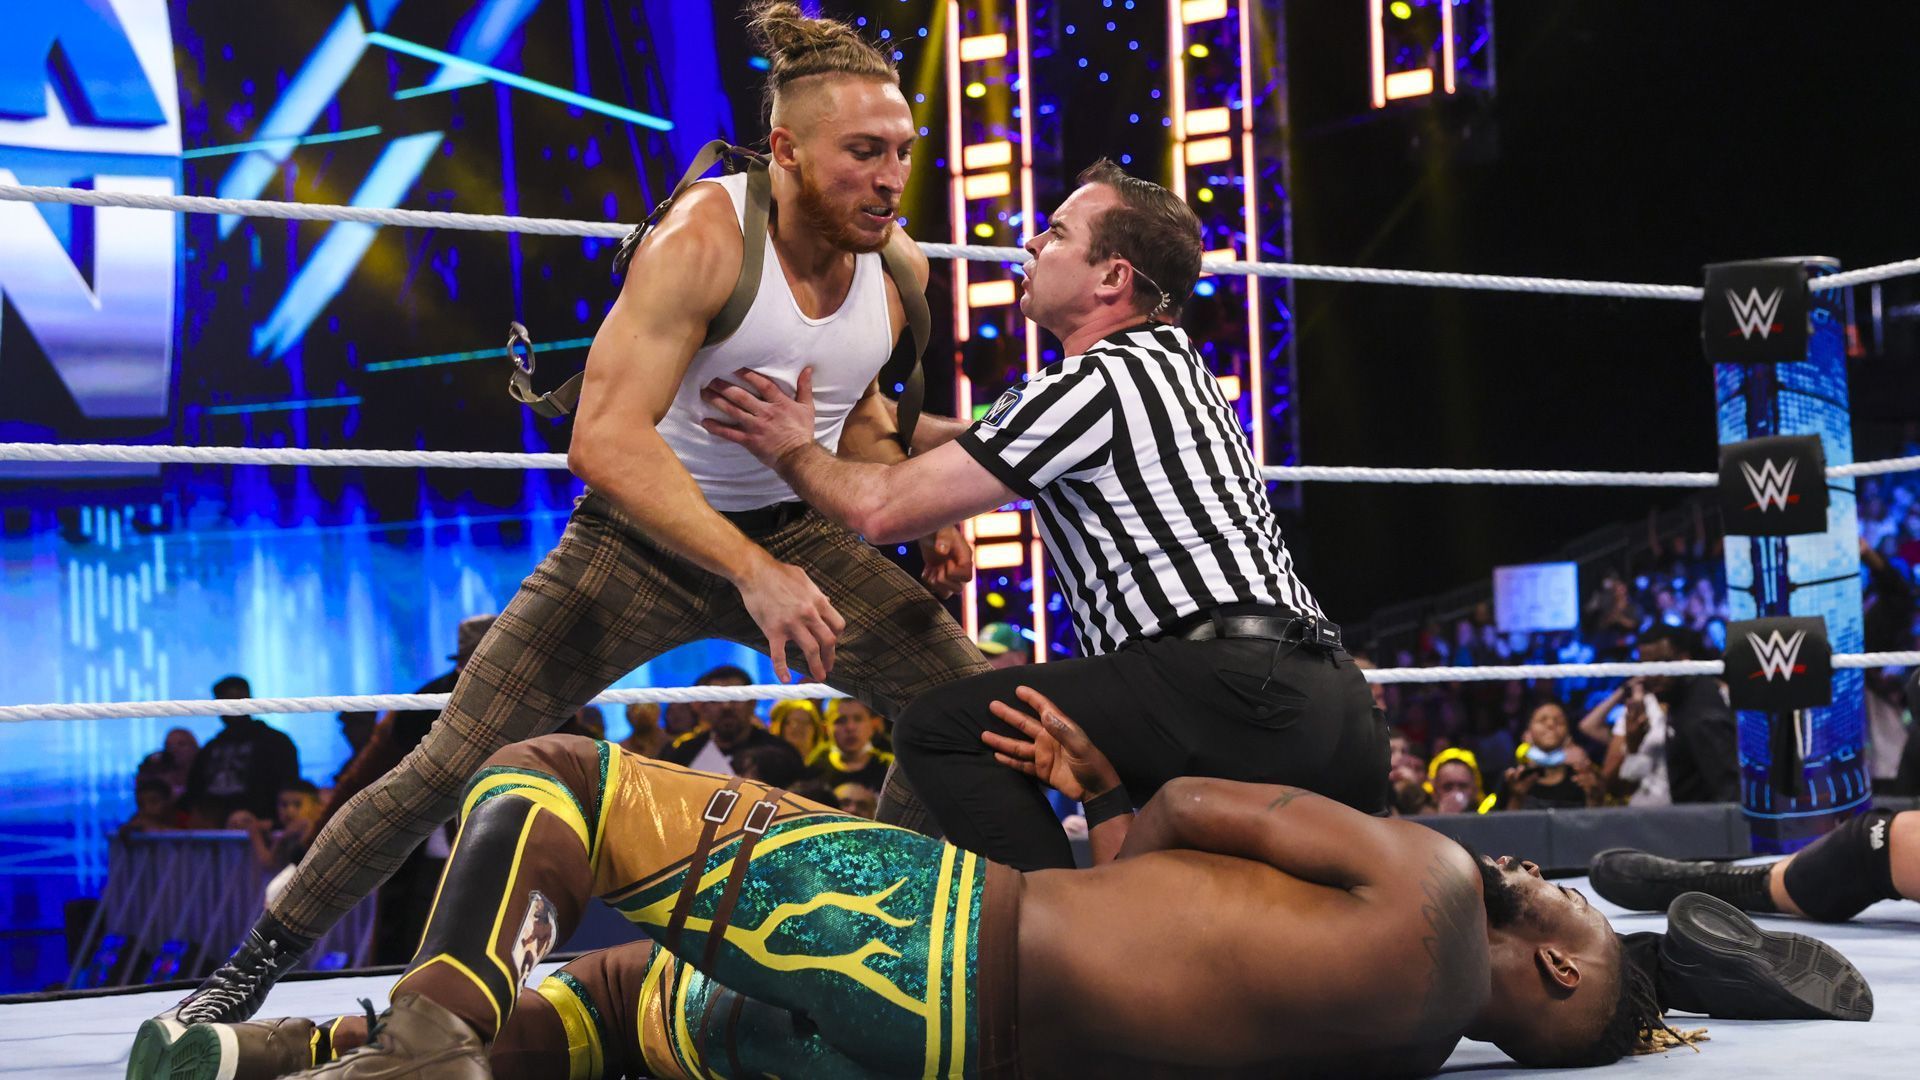 Butch debuted during the ongoing feud between Sheamus and the New Day.